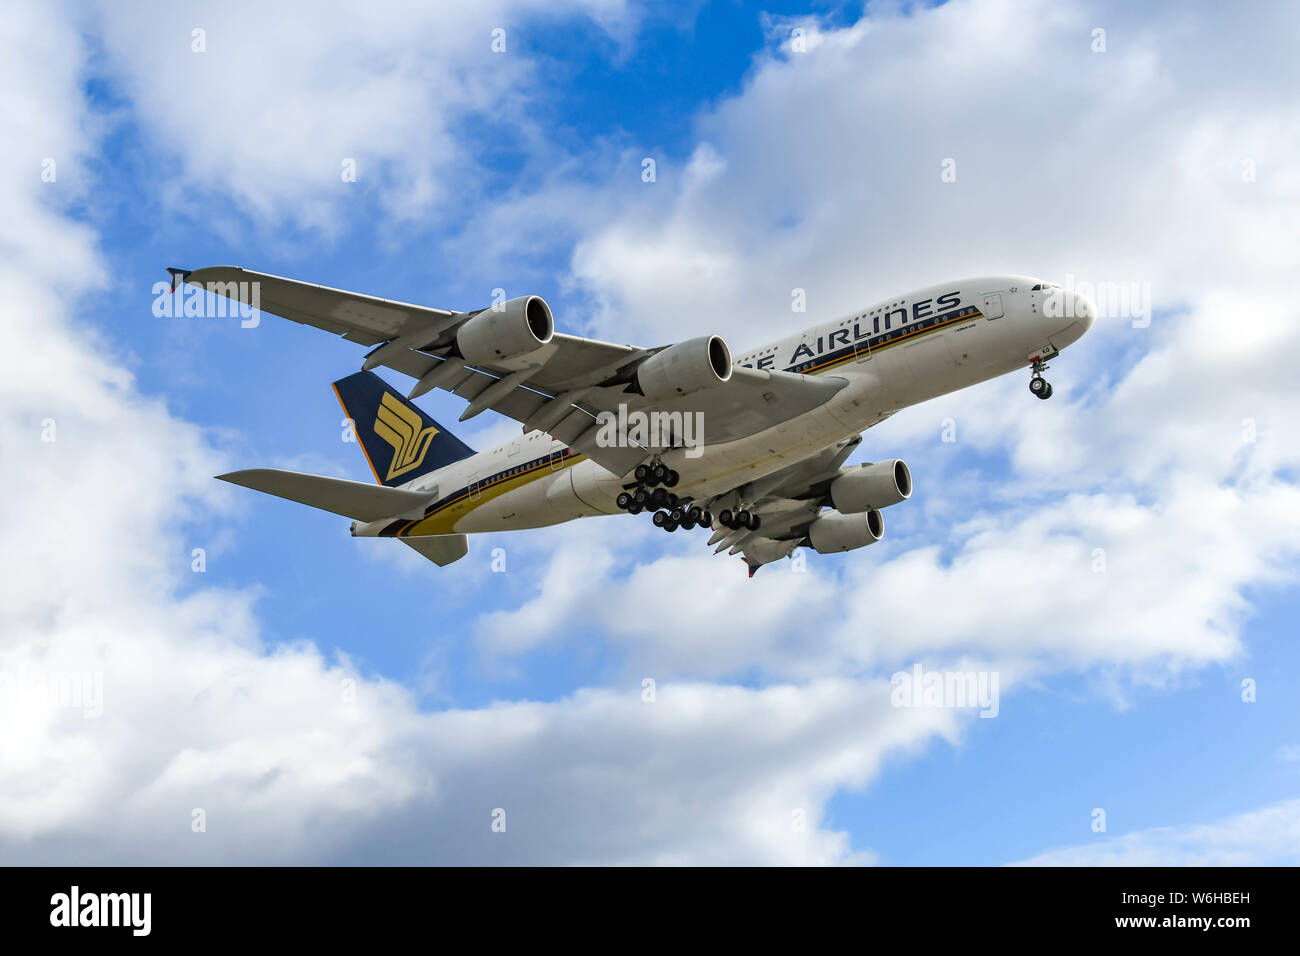 LONDON, ENGLAND - NOVEMBER 2018: Singapore Airlines Airbus A380 jet coming in to land at London Heathrow Airport. Stock Photo